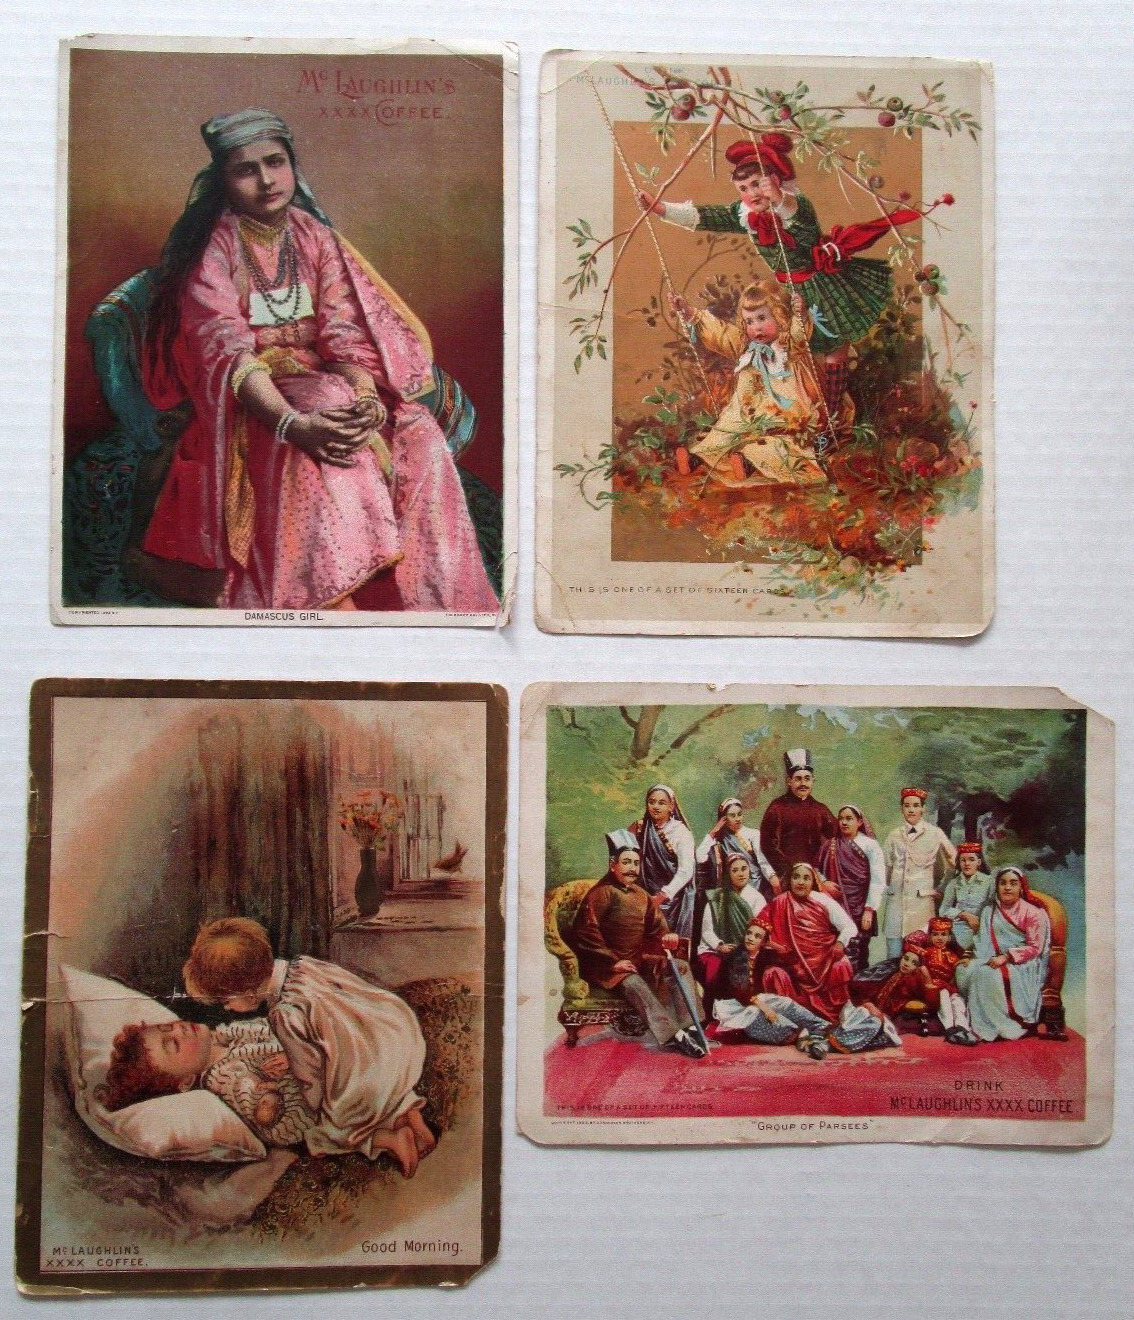 FOUR McLaughlin XXXX Coffee Victorian Trade Picture Cards Lot of 4 - E6C